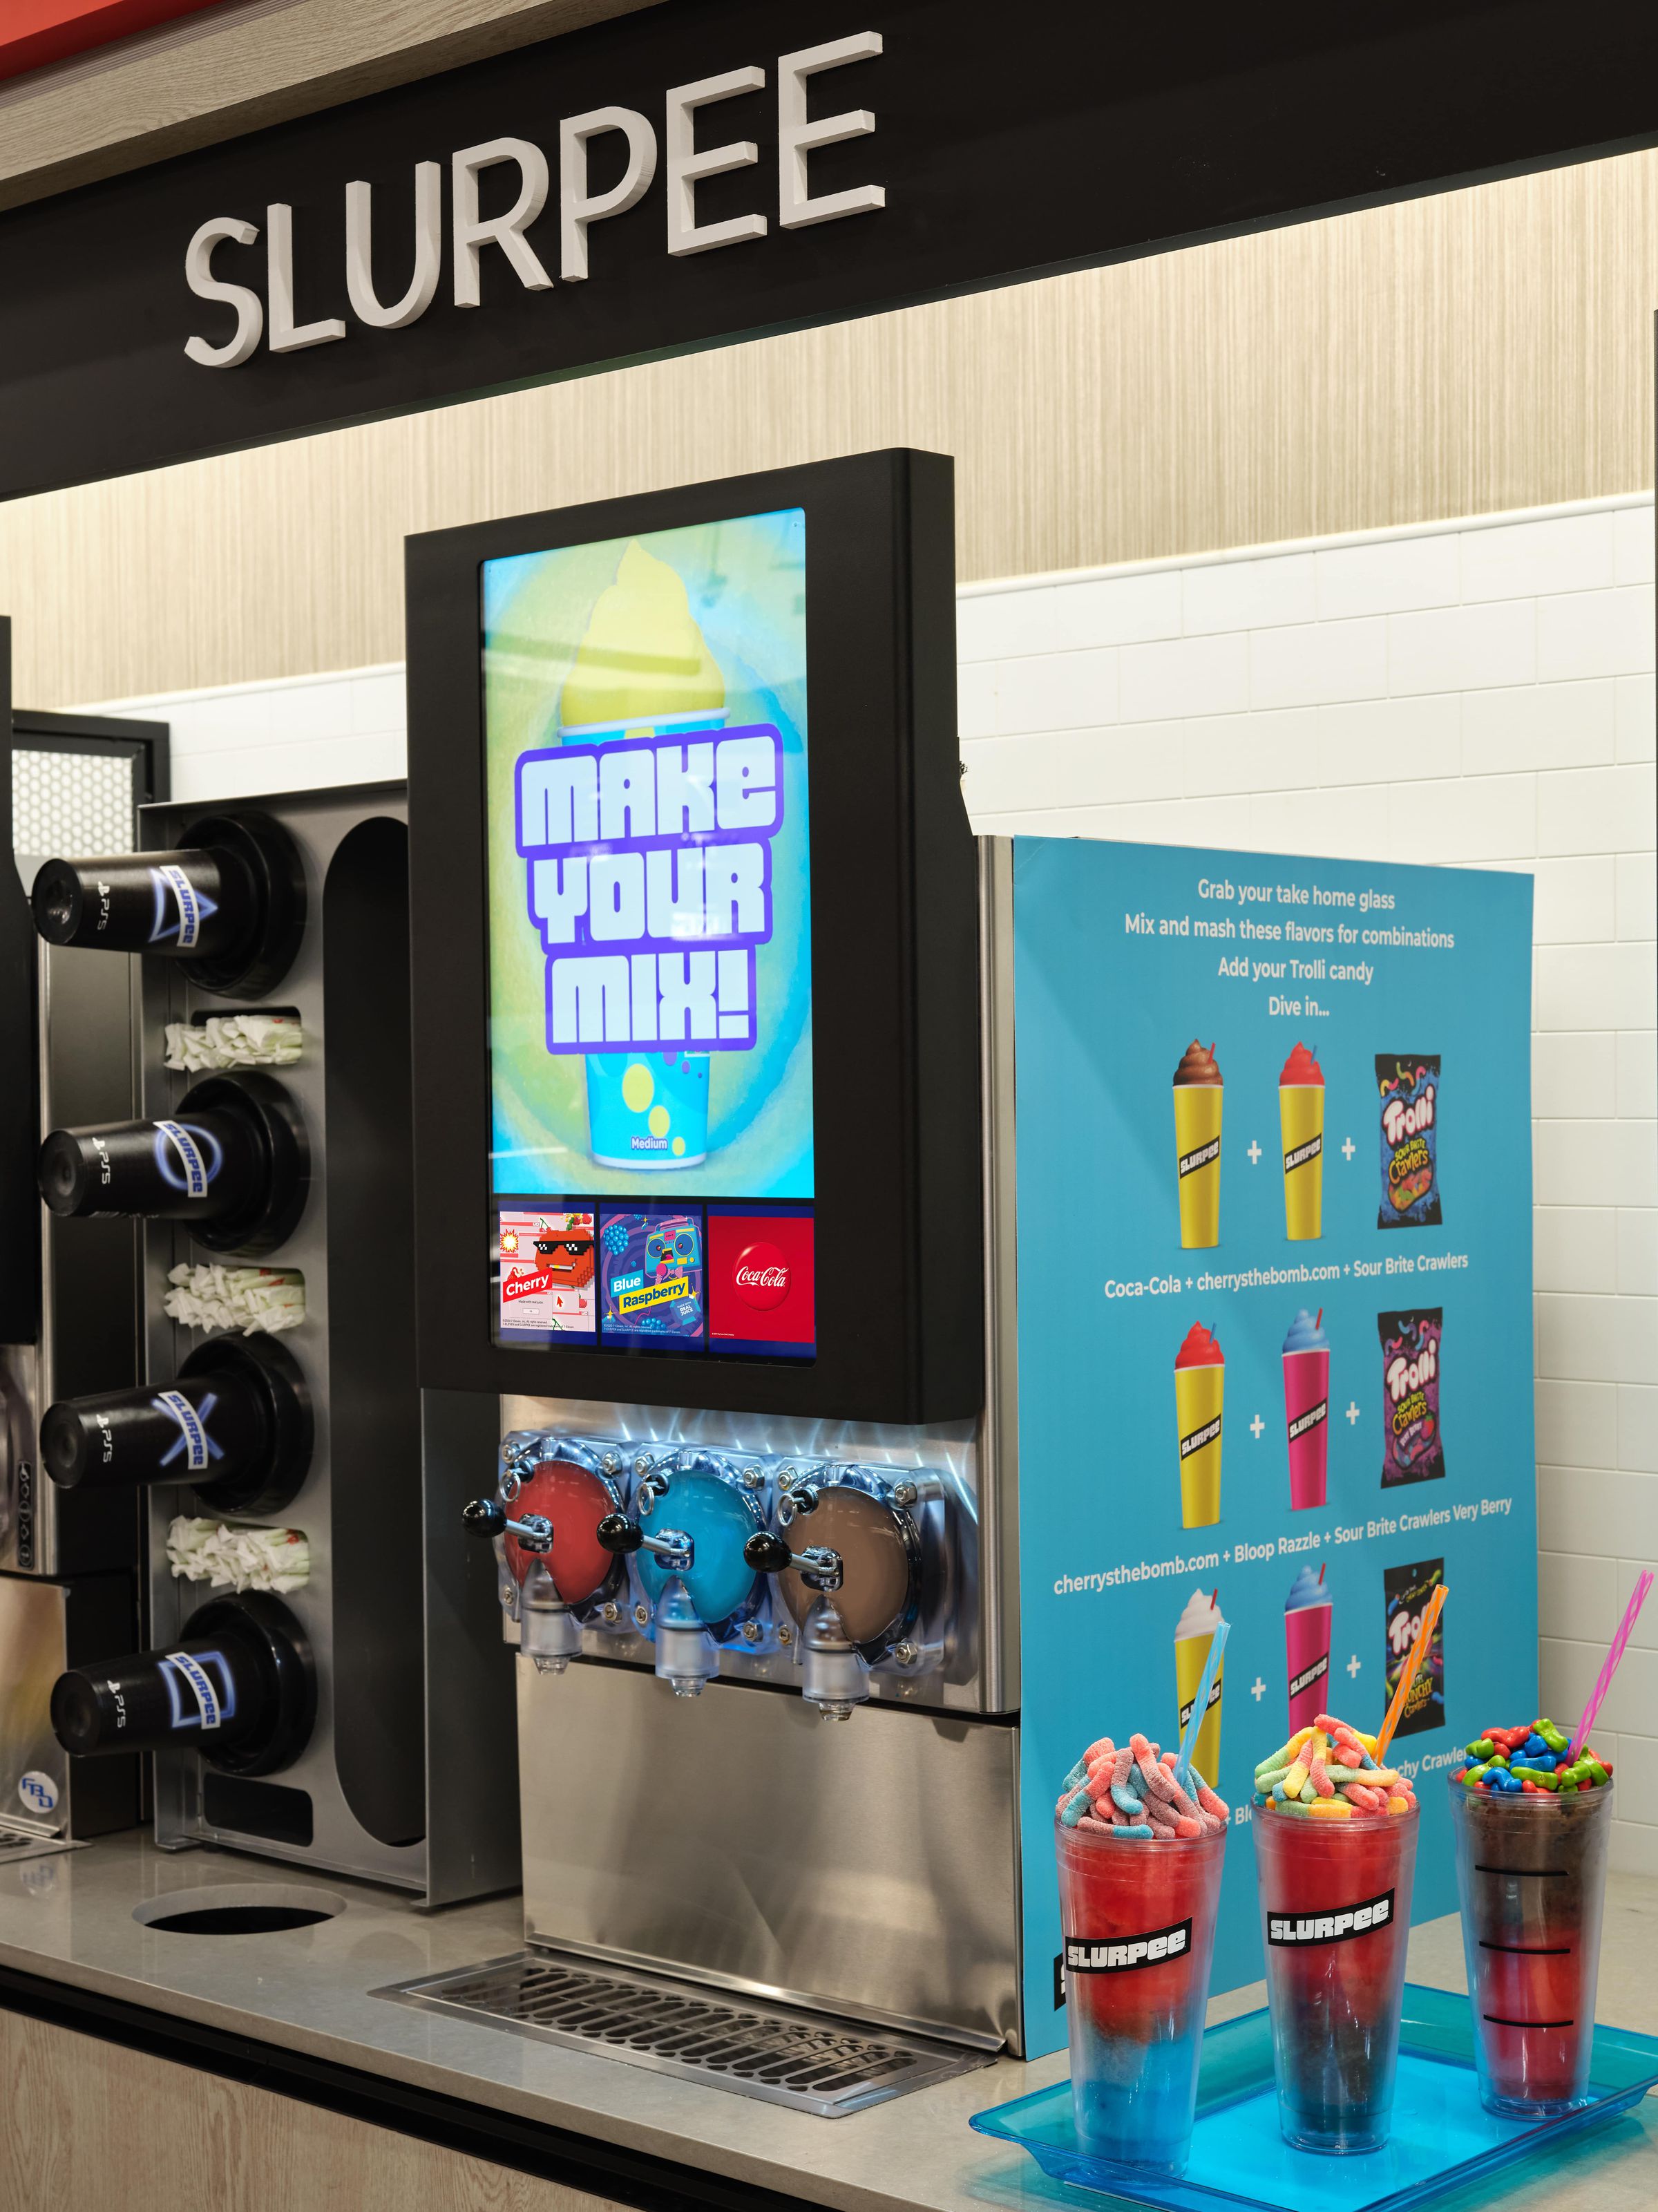 True power is having access to an all-you-can-drink Slurpee machine.